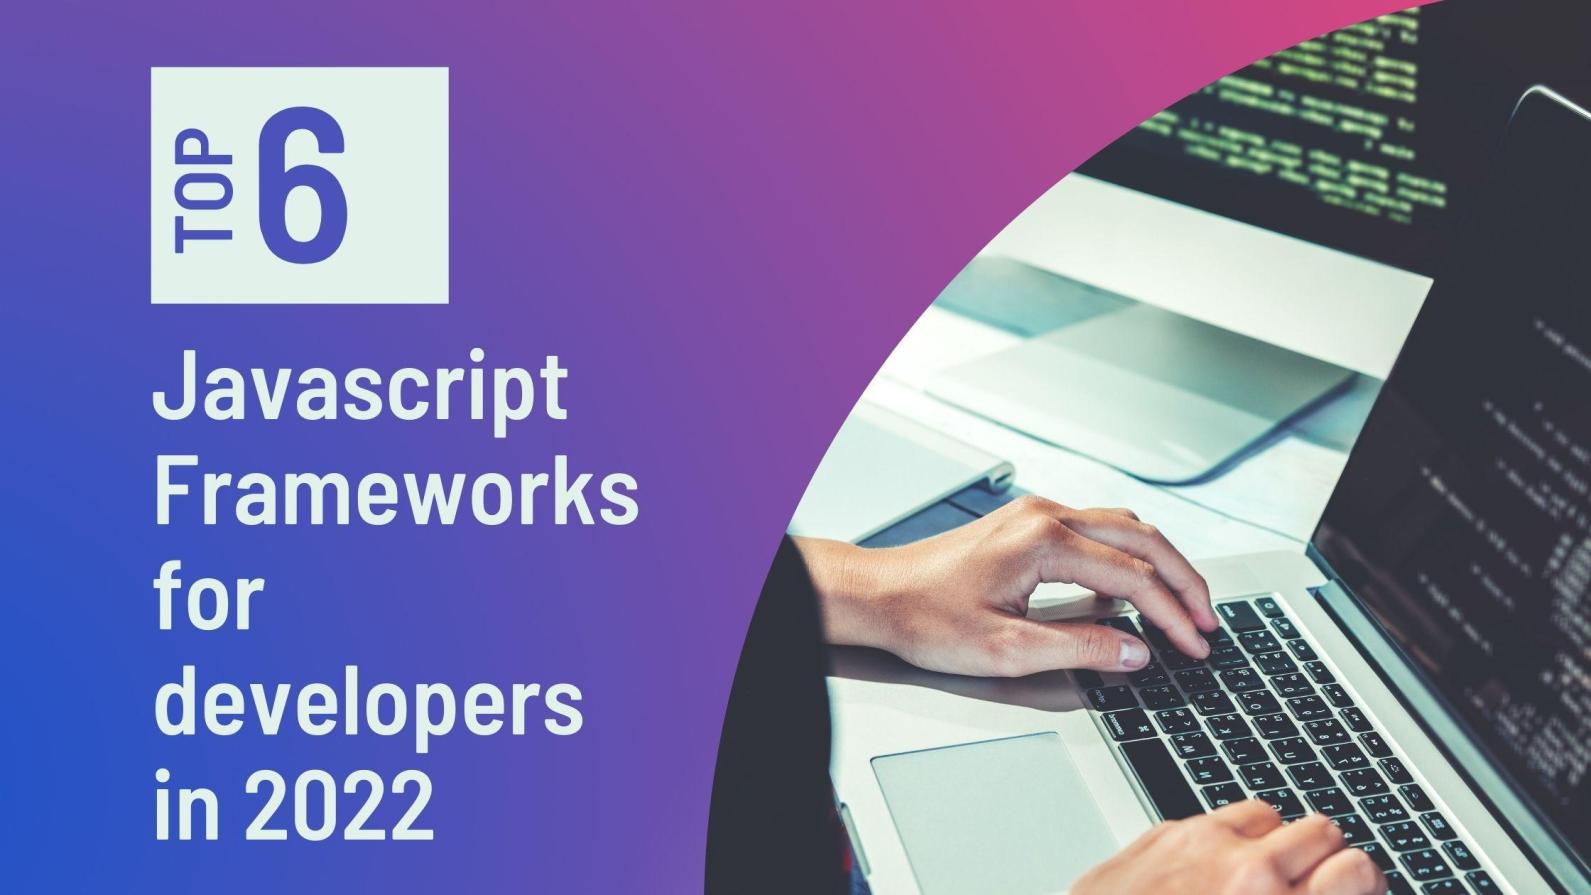 What Are the Benefits of Using JavaScript Frameworks?